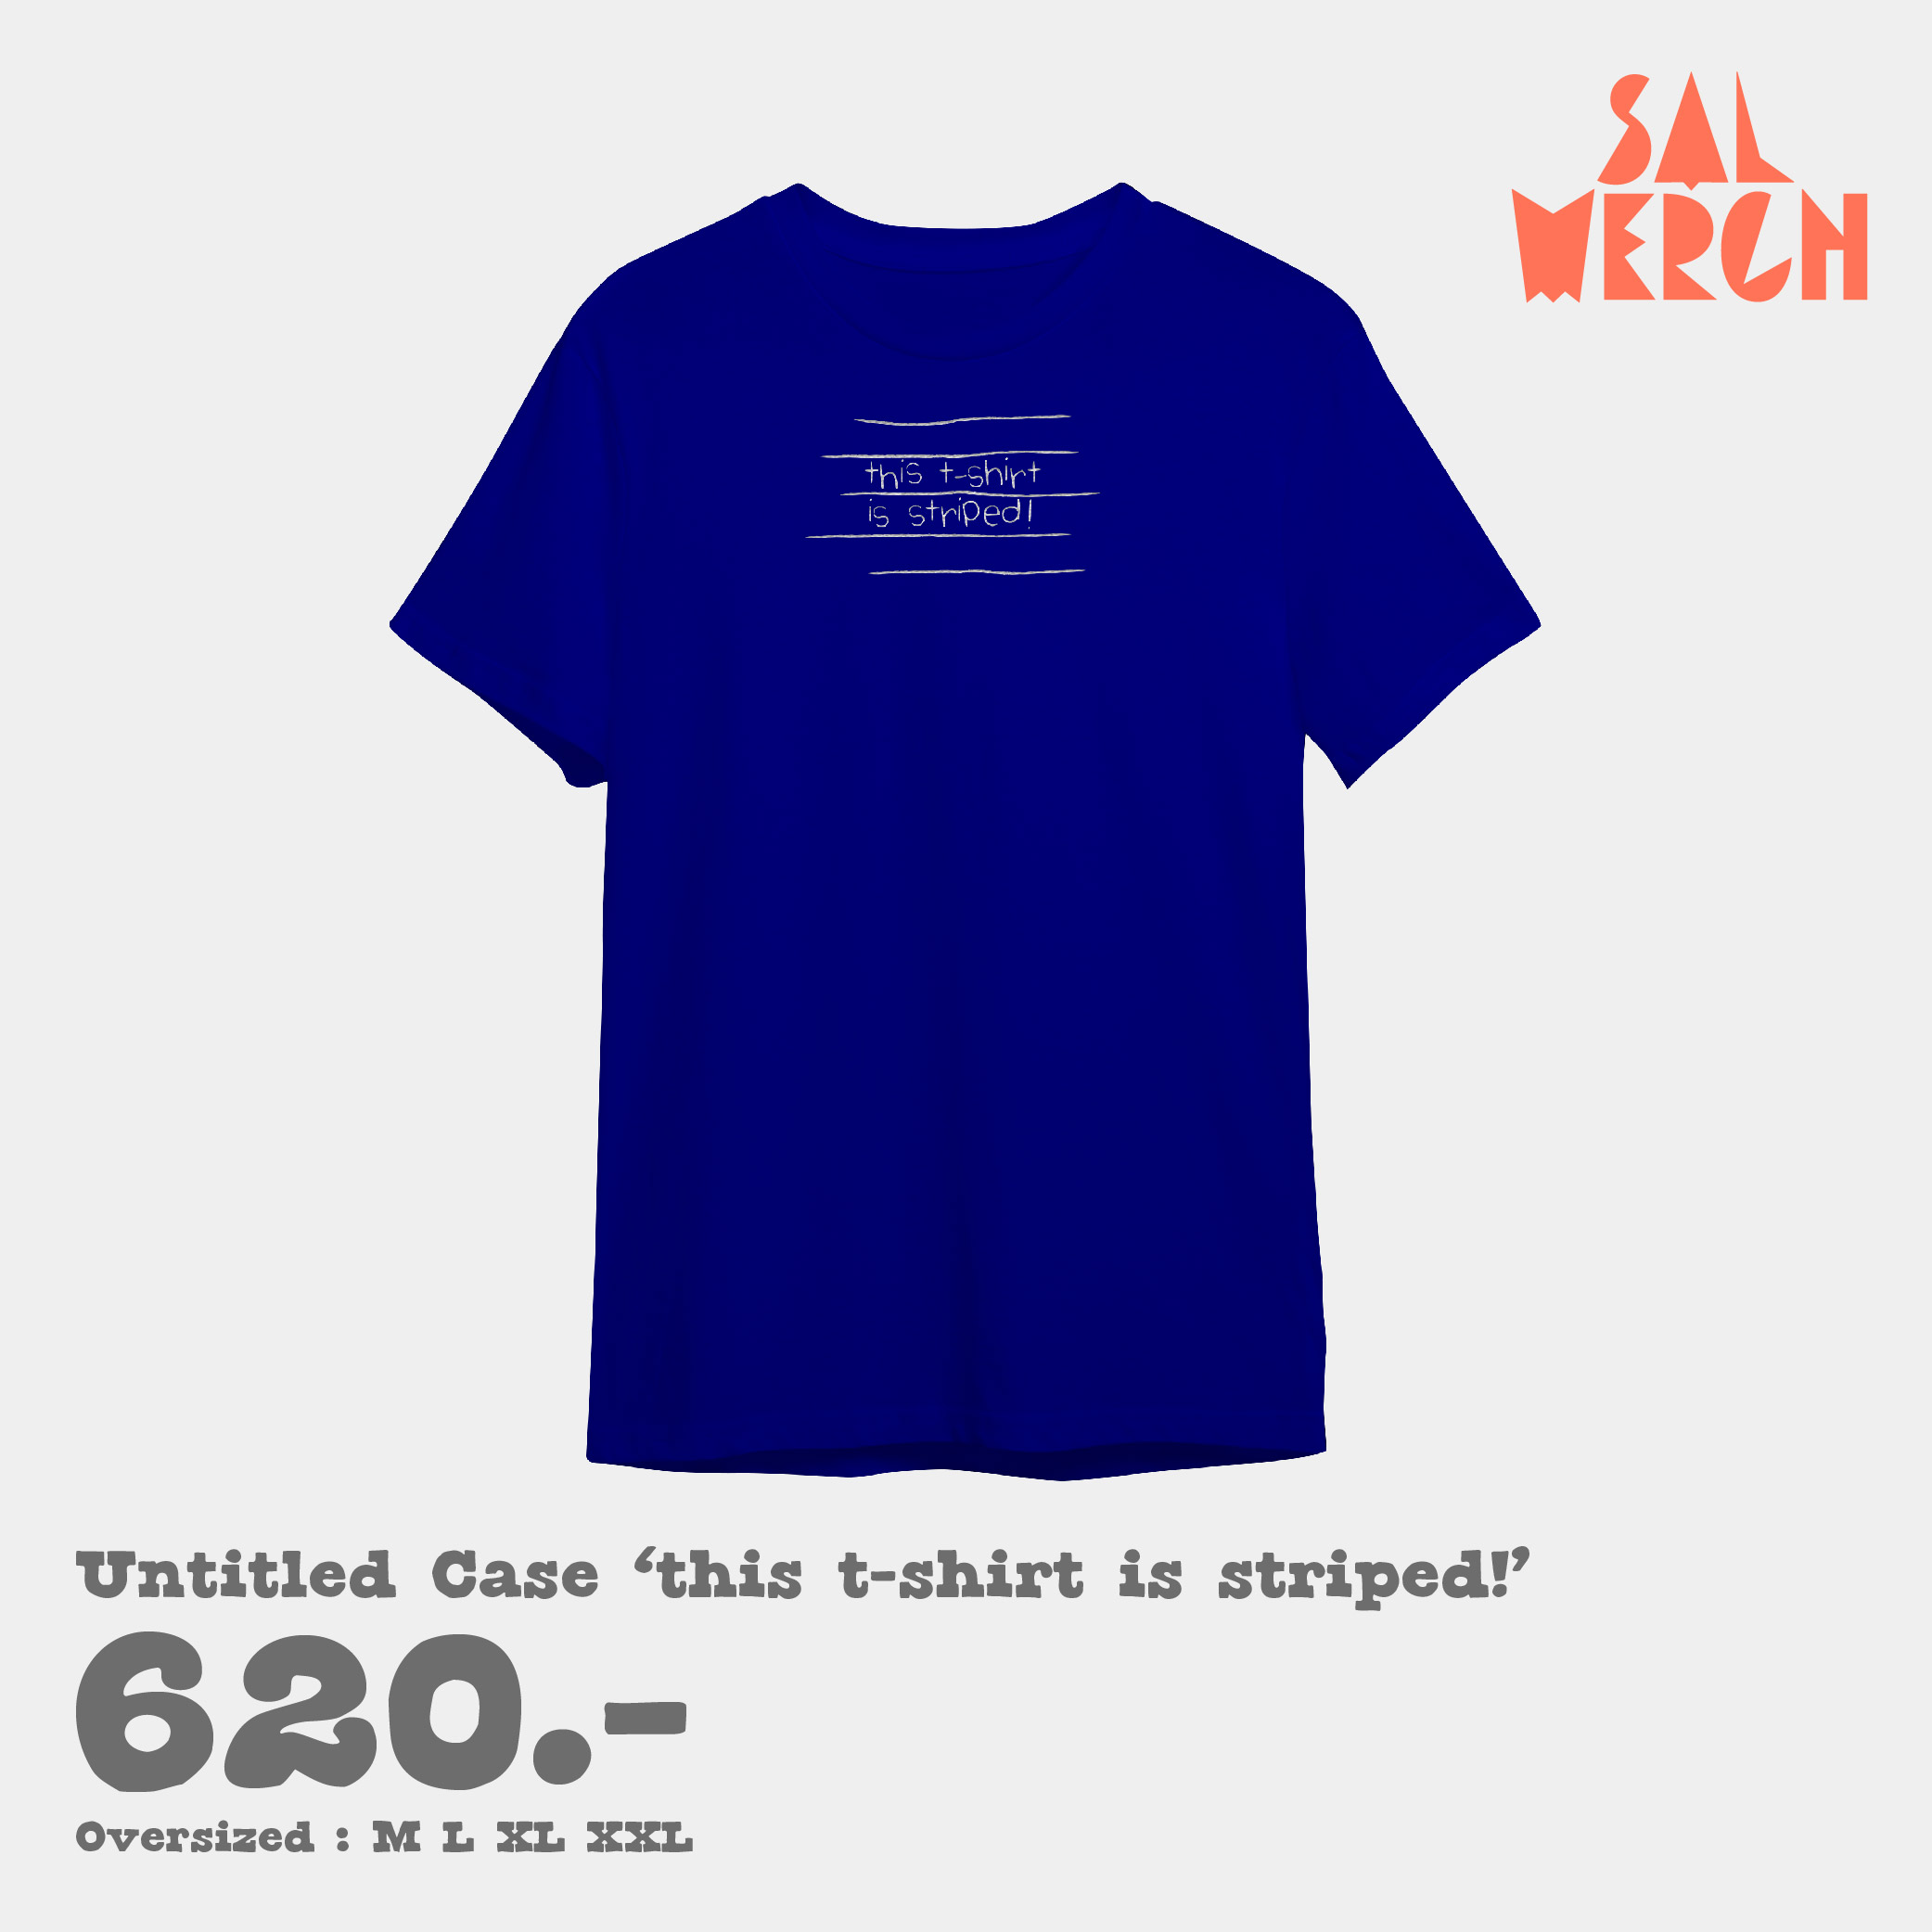 UNTITLED CASE "this t-shirt is striped" SIZE XL